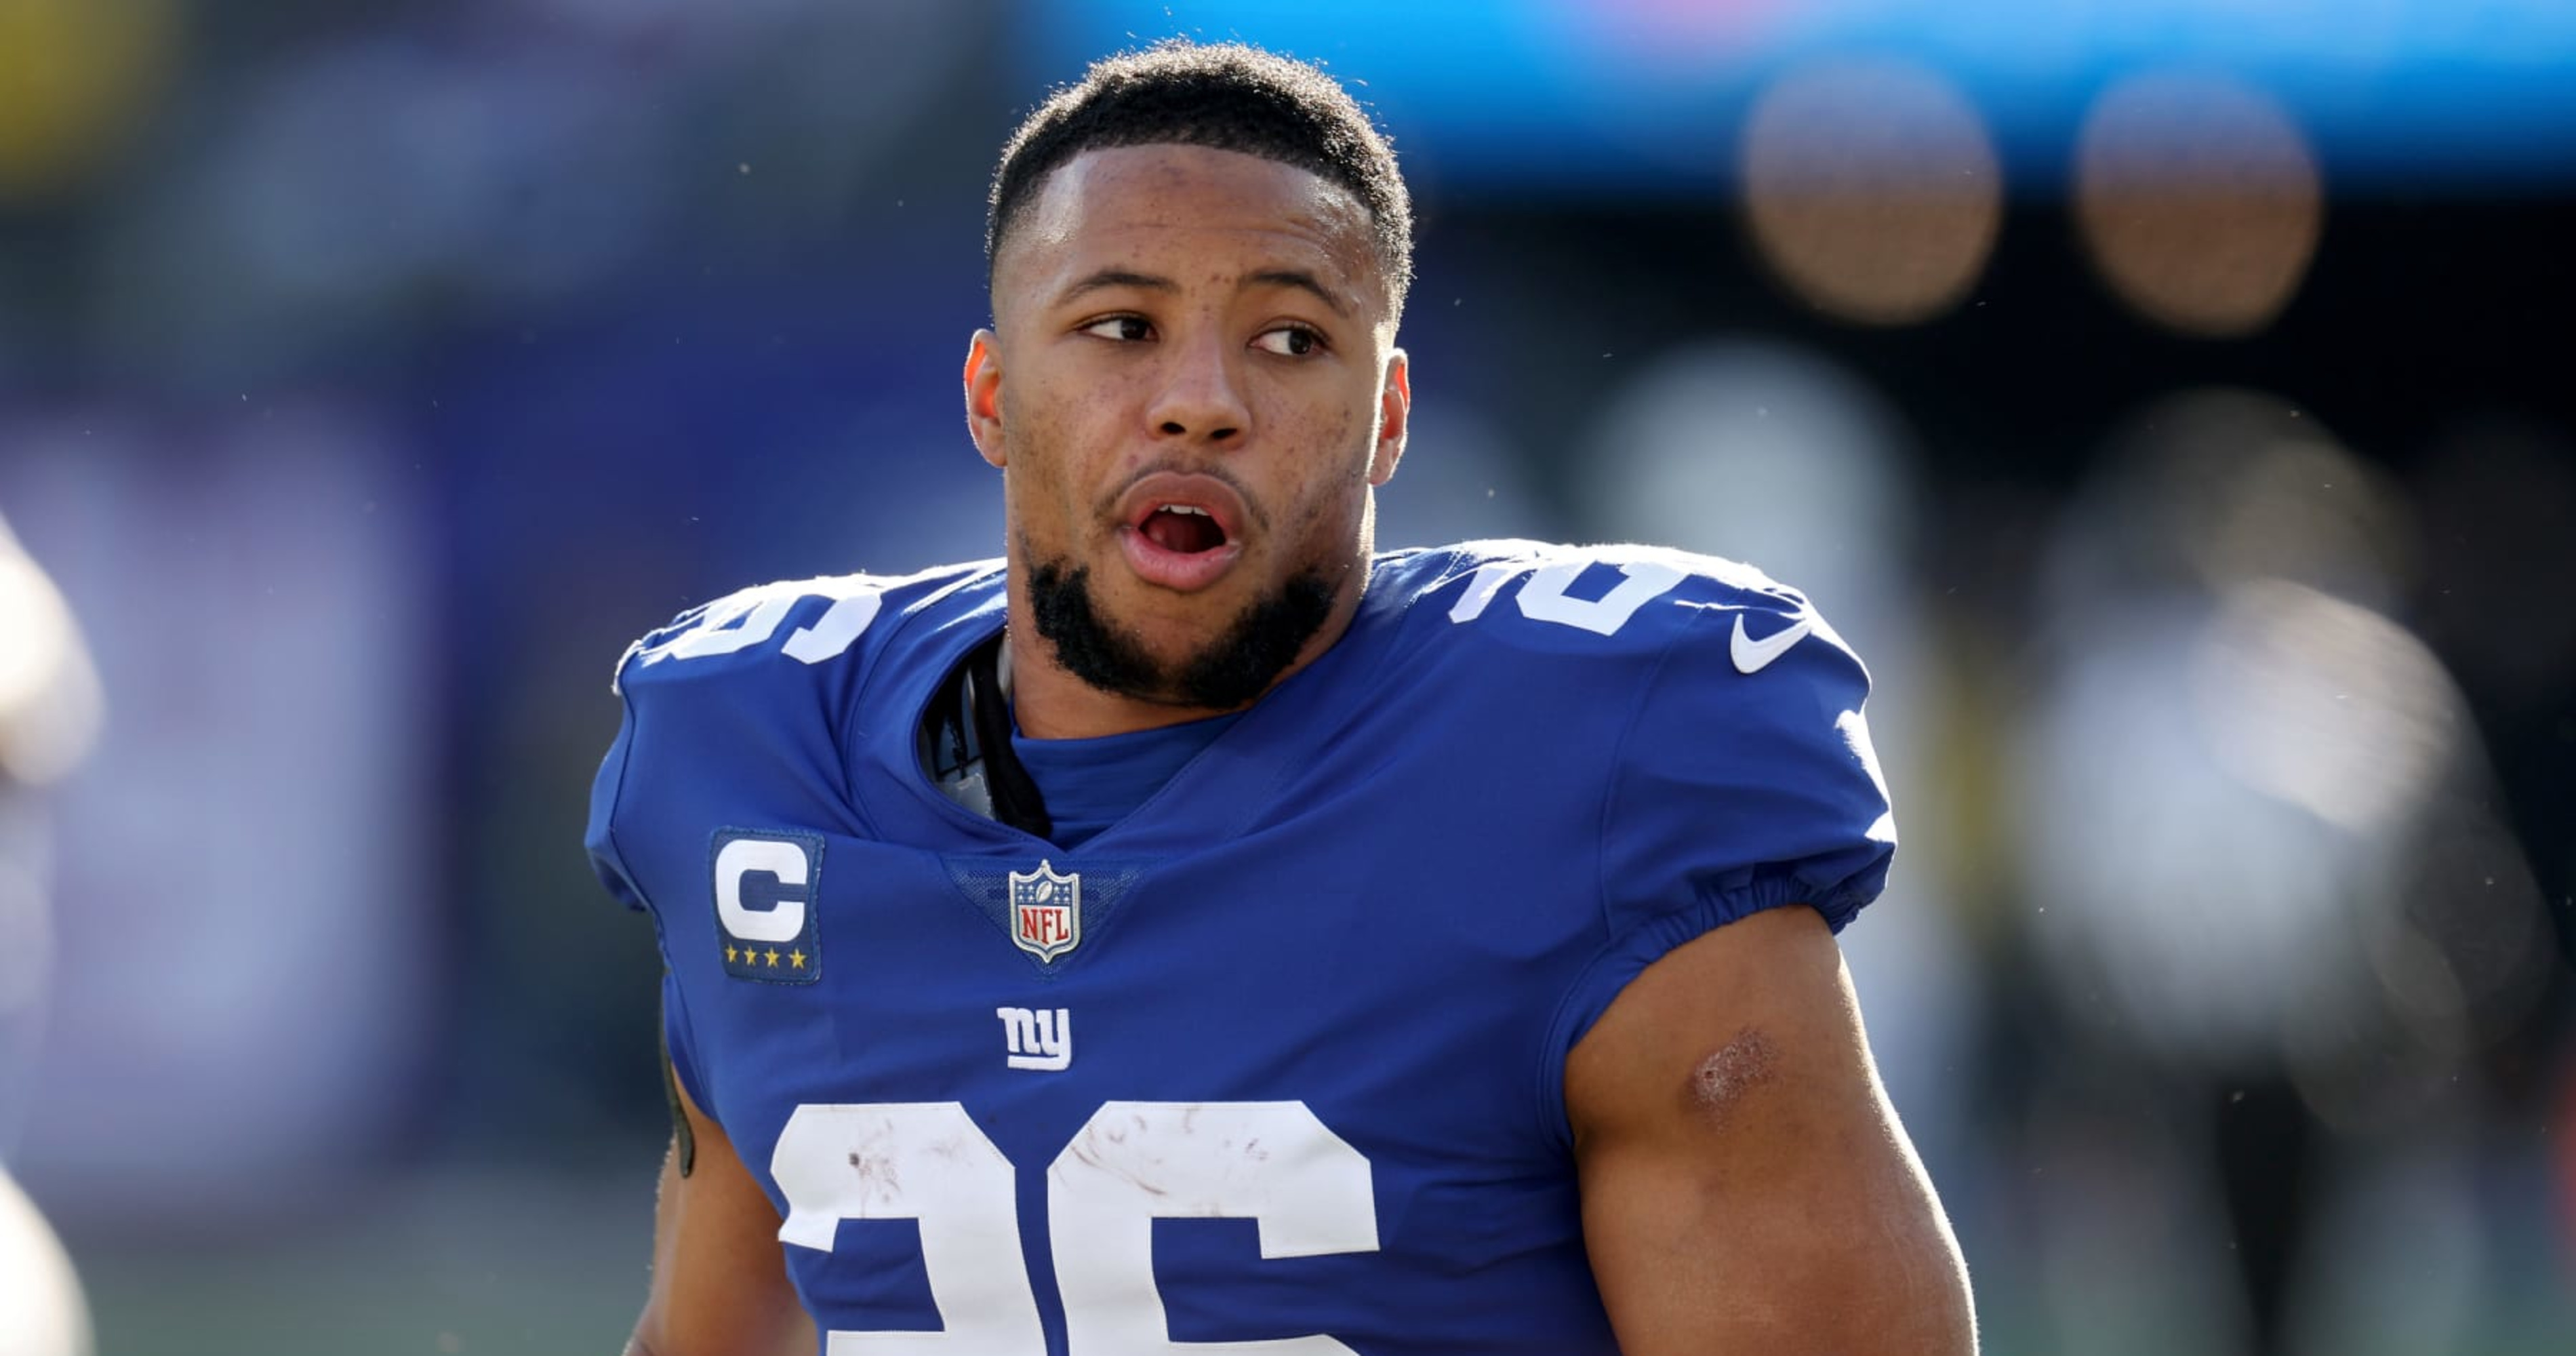 NFL Rumors: Saquon Barkley More Likely Than Josh Jacobs to Get Contract ...